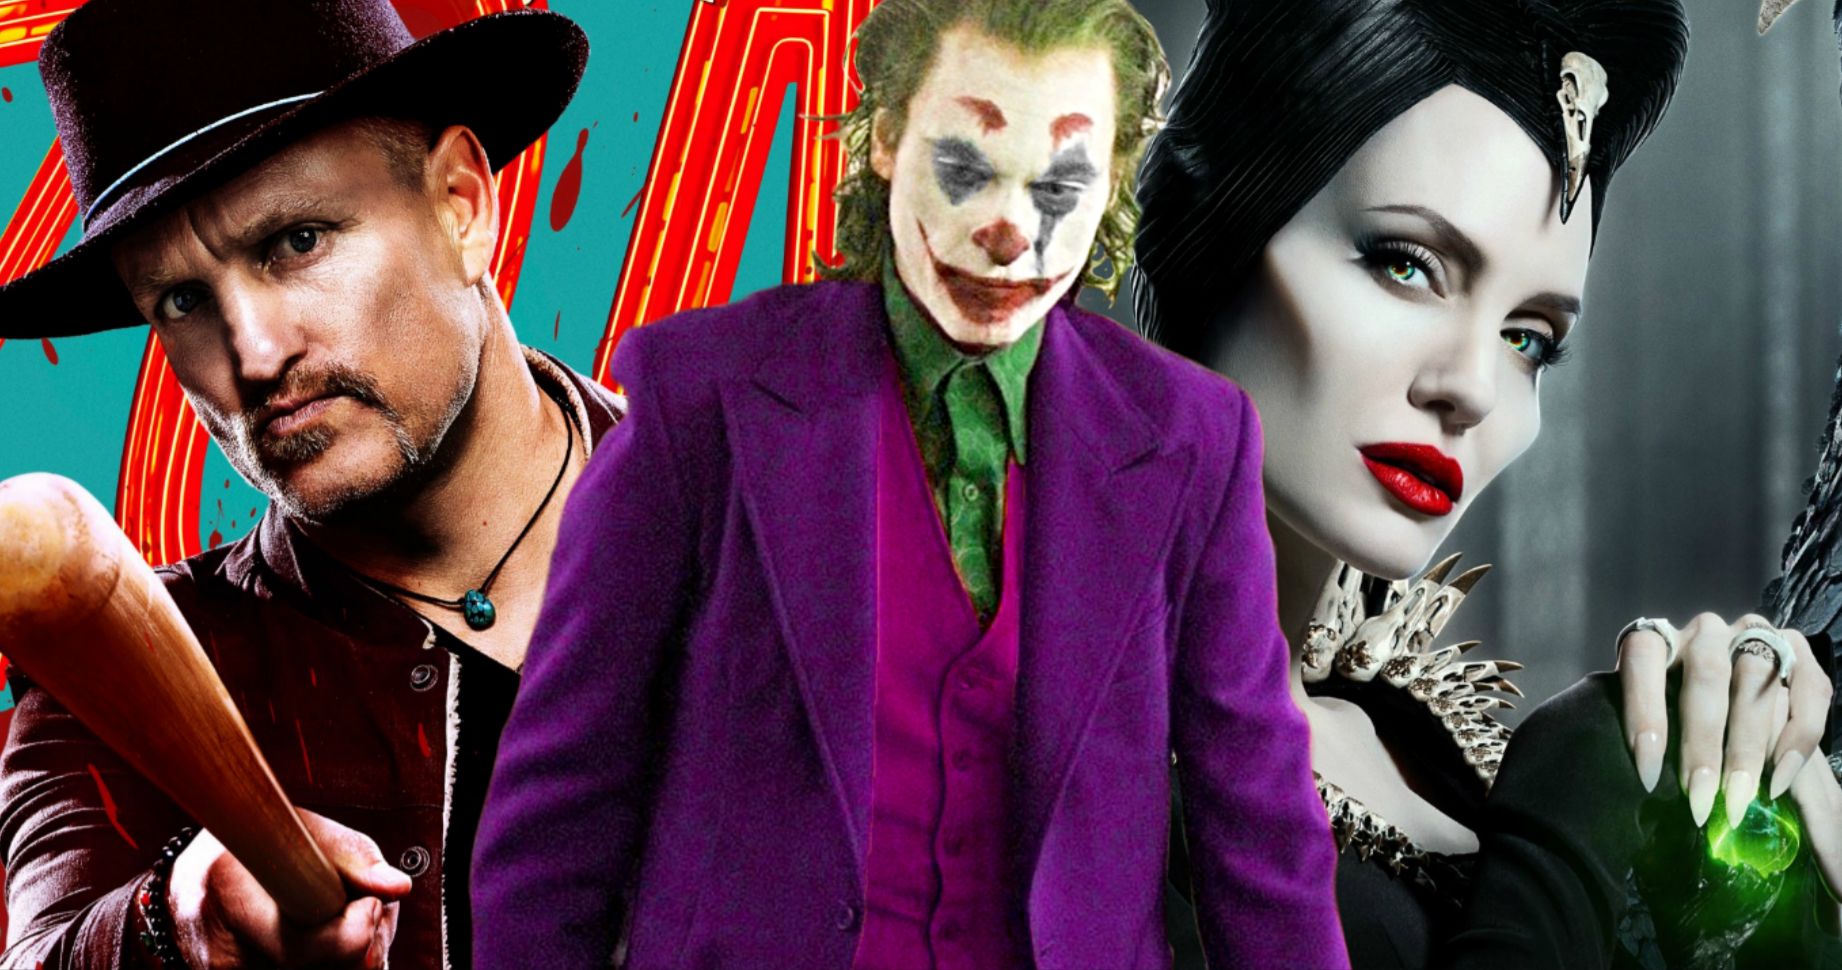 Can Maleficent 2 or Zombieland: Double Tap Take Down Joker at the Box Office?